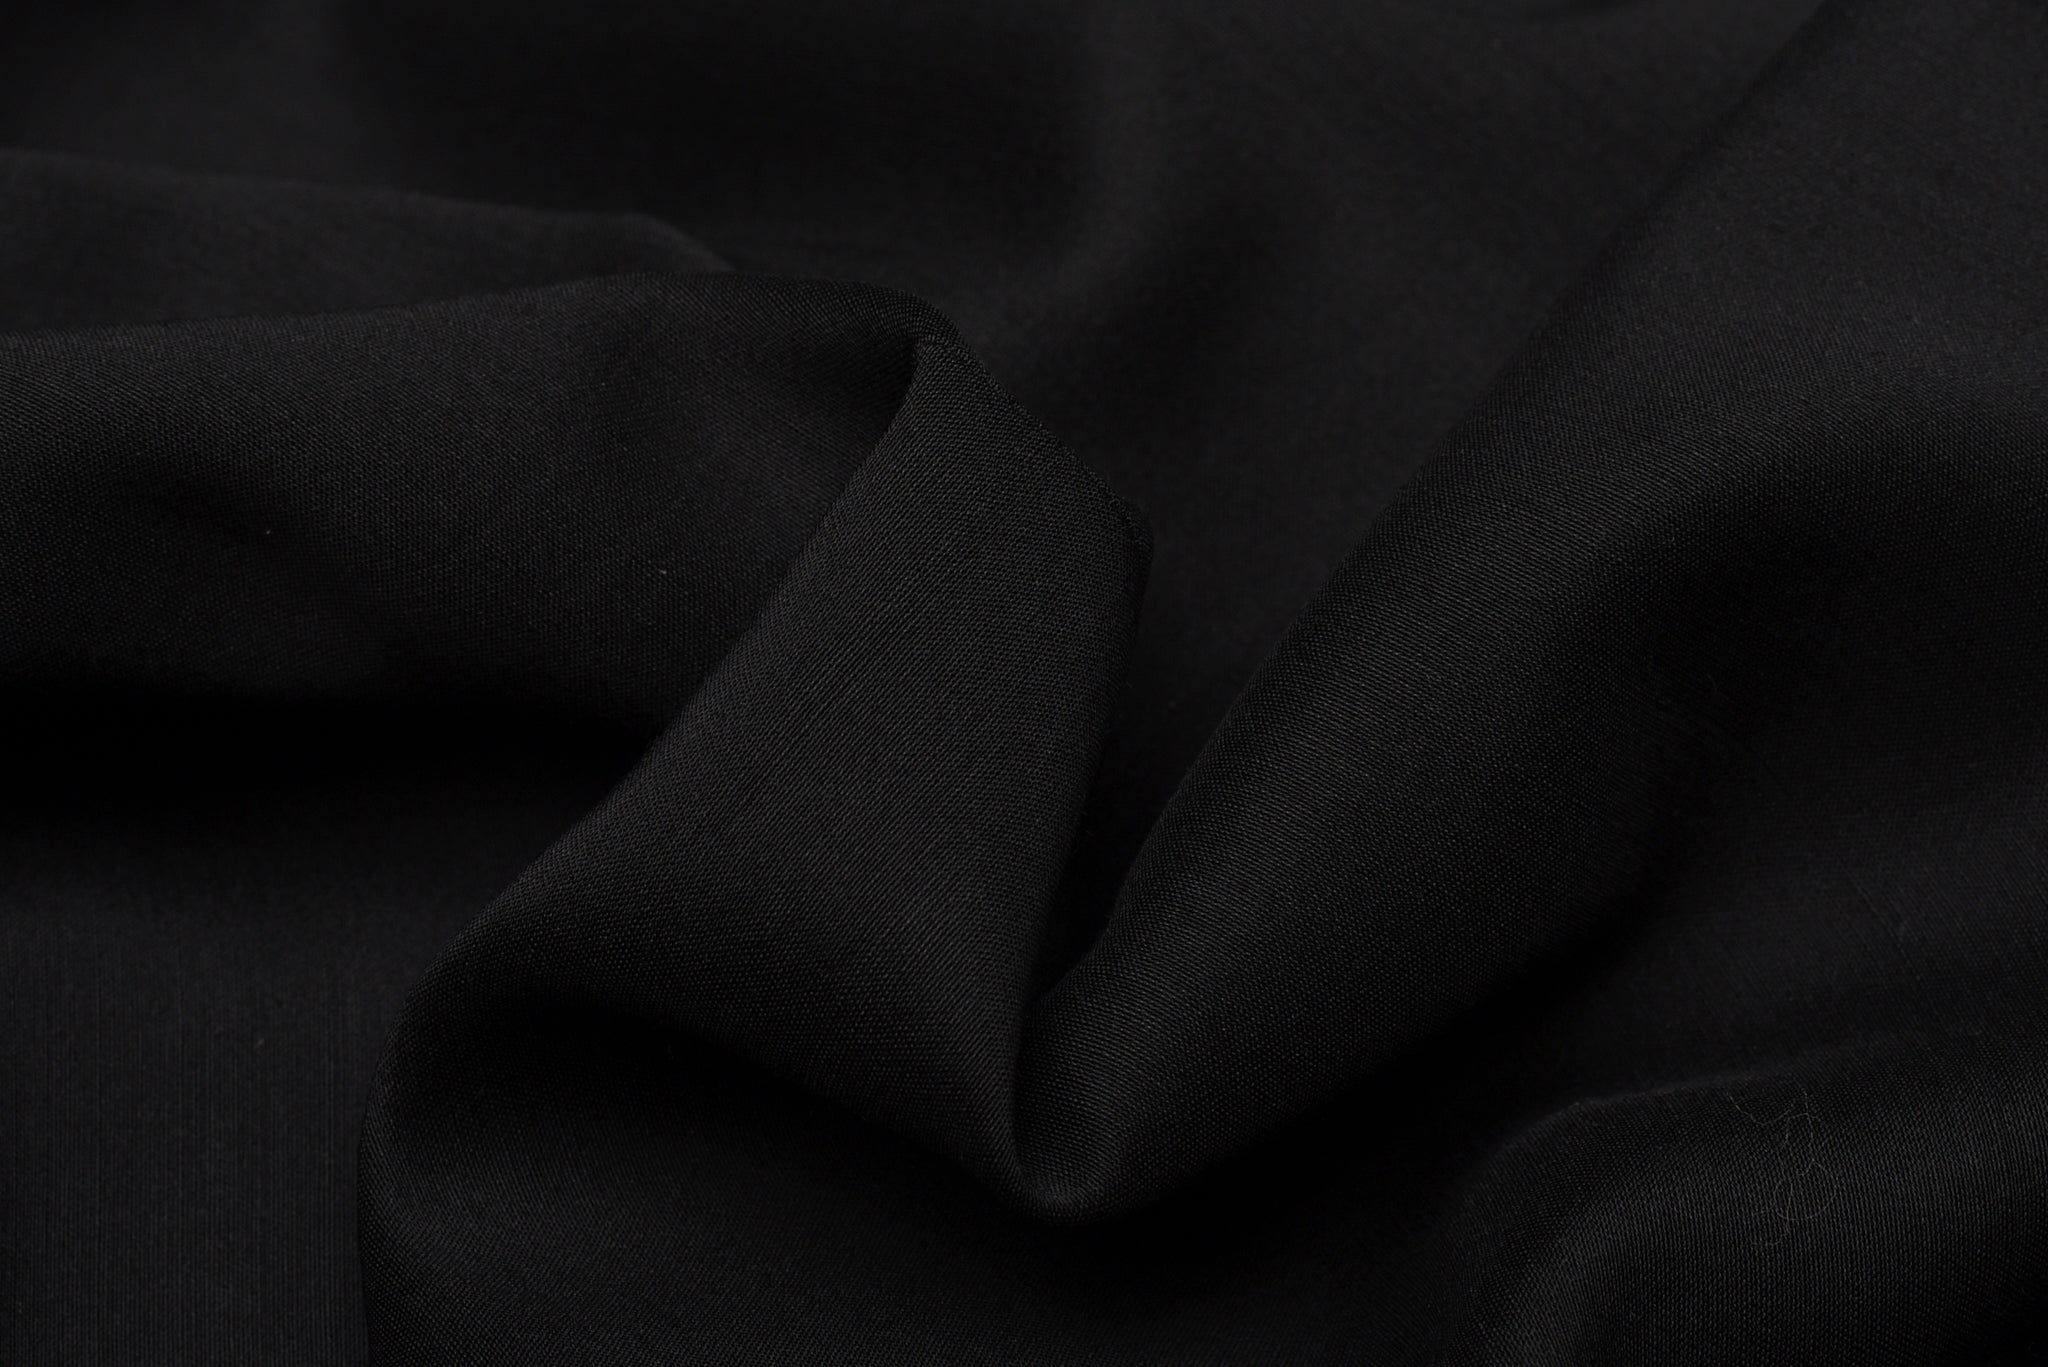 D'AVENZA For VICTOR TALBOTS NY Handmade Black Wool-Silk Suit 54 NEW 44 Long D'AVENZA